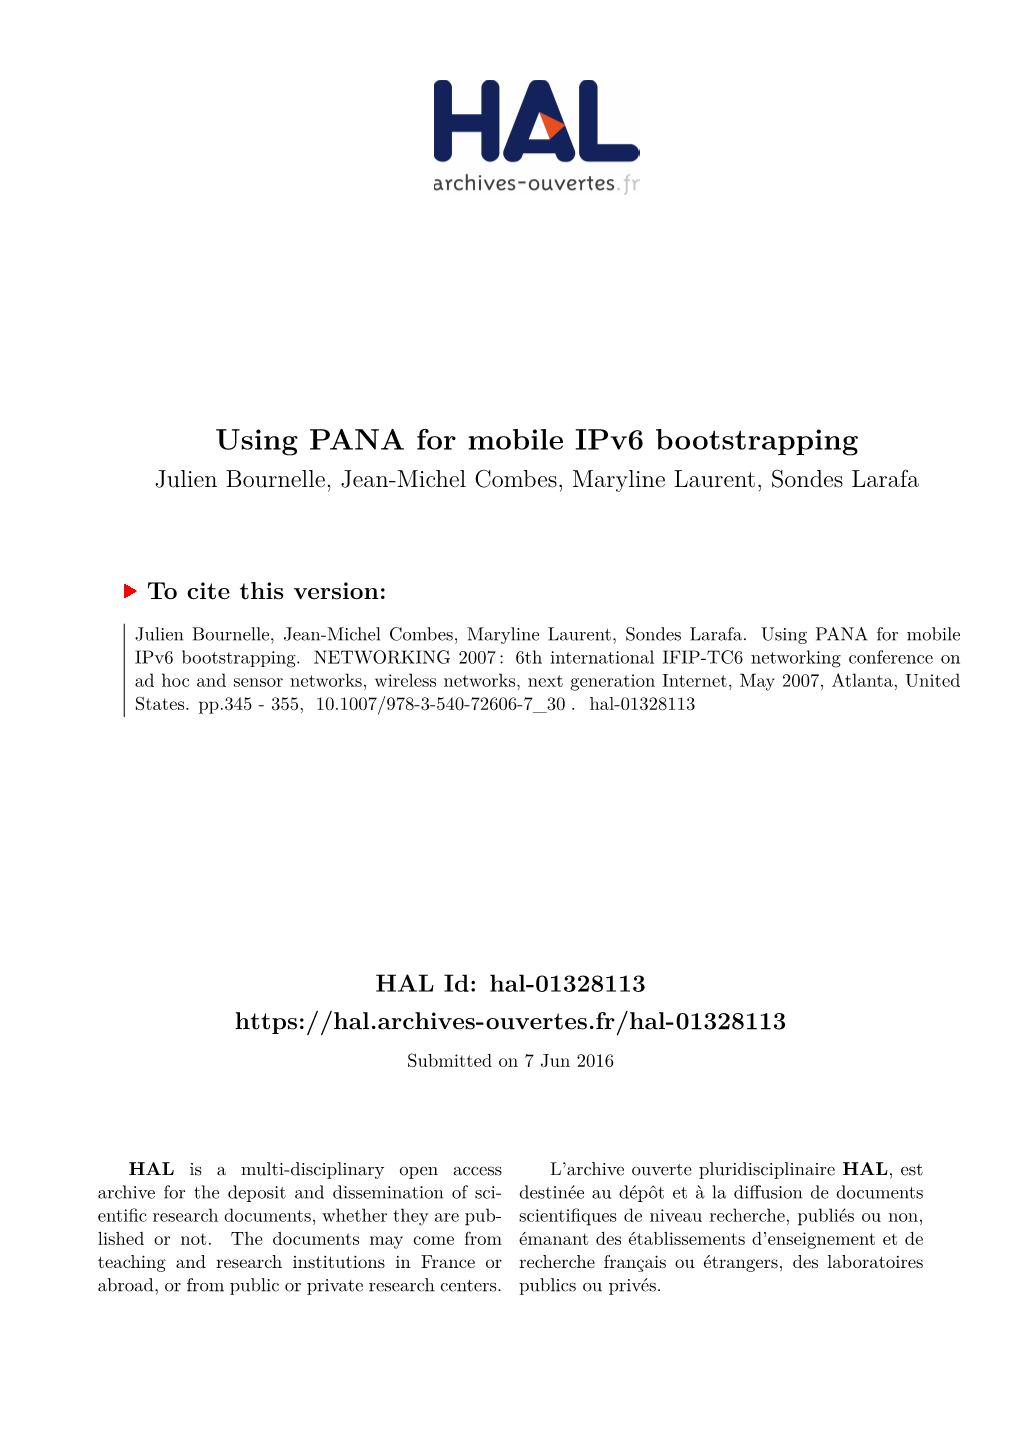 Using PANA for Mobile Ipv6 Bootstrapping Julien Bournelle, Jean-Michel Combes, Maryline Laurent, Sondes Larafa